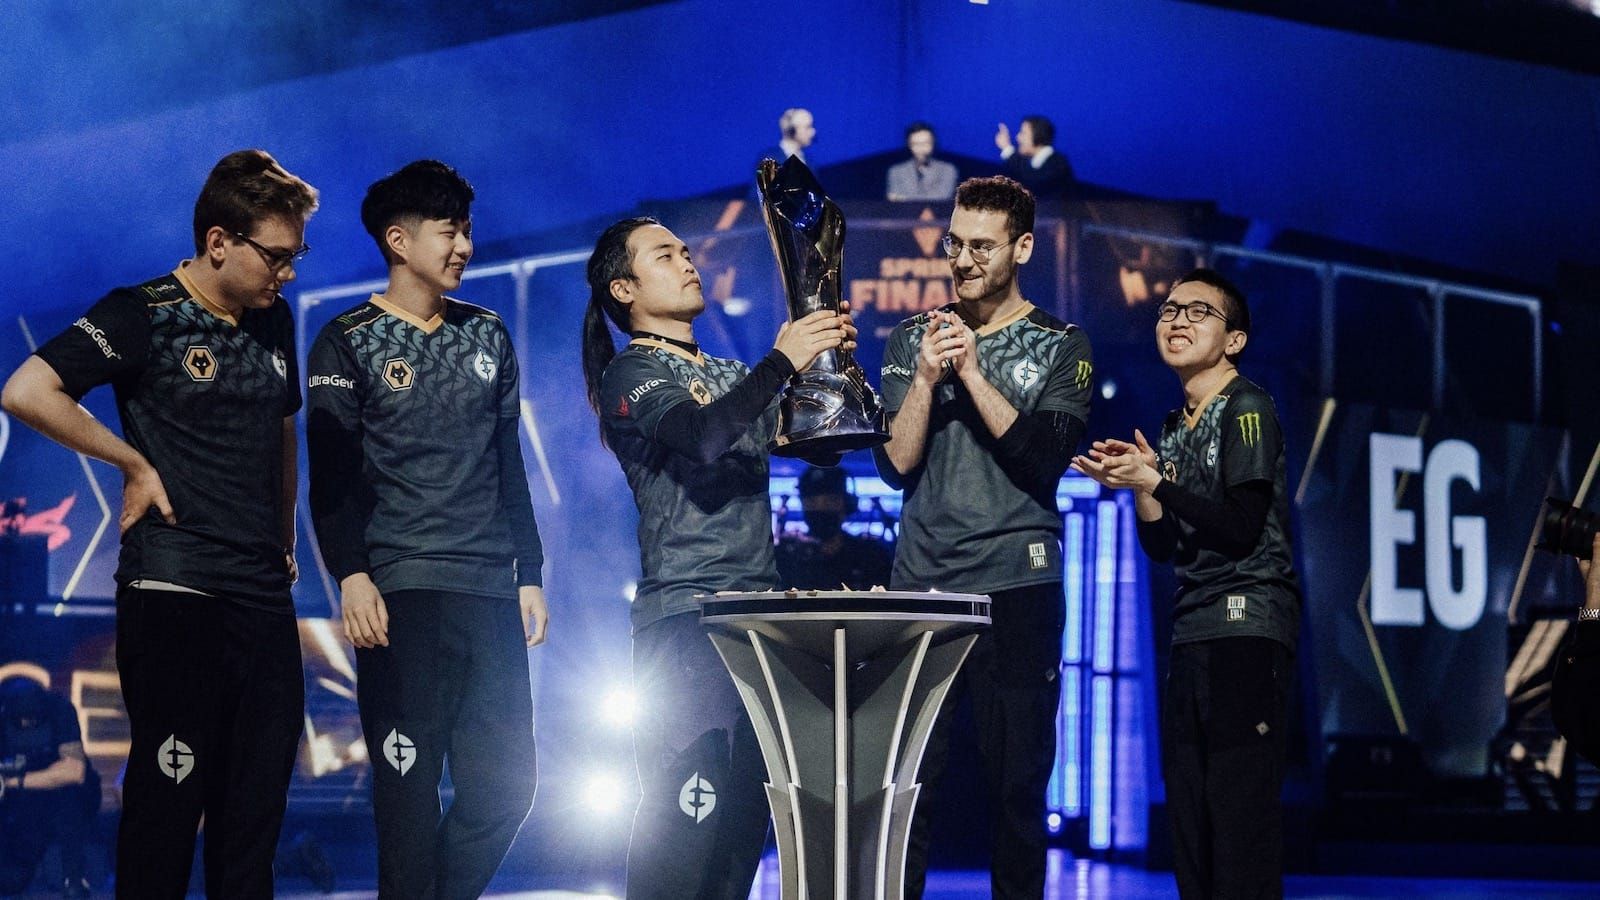 Evil Geniuses League of Legends team on stage after Spring 2022 finals win lifting trophy